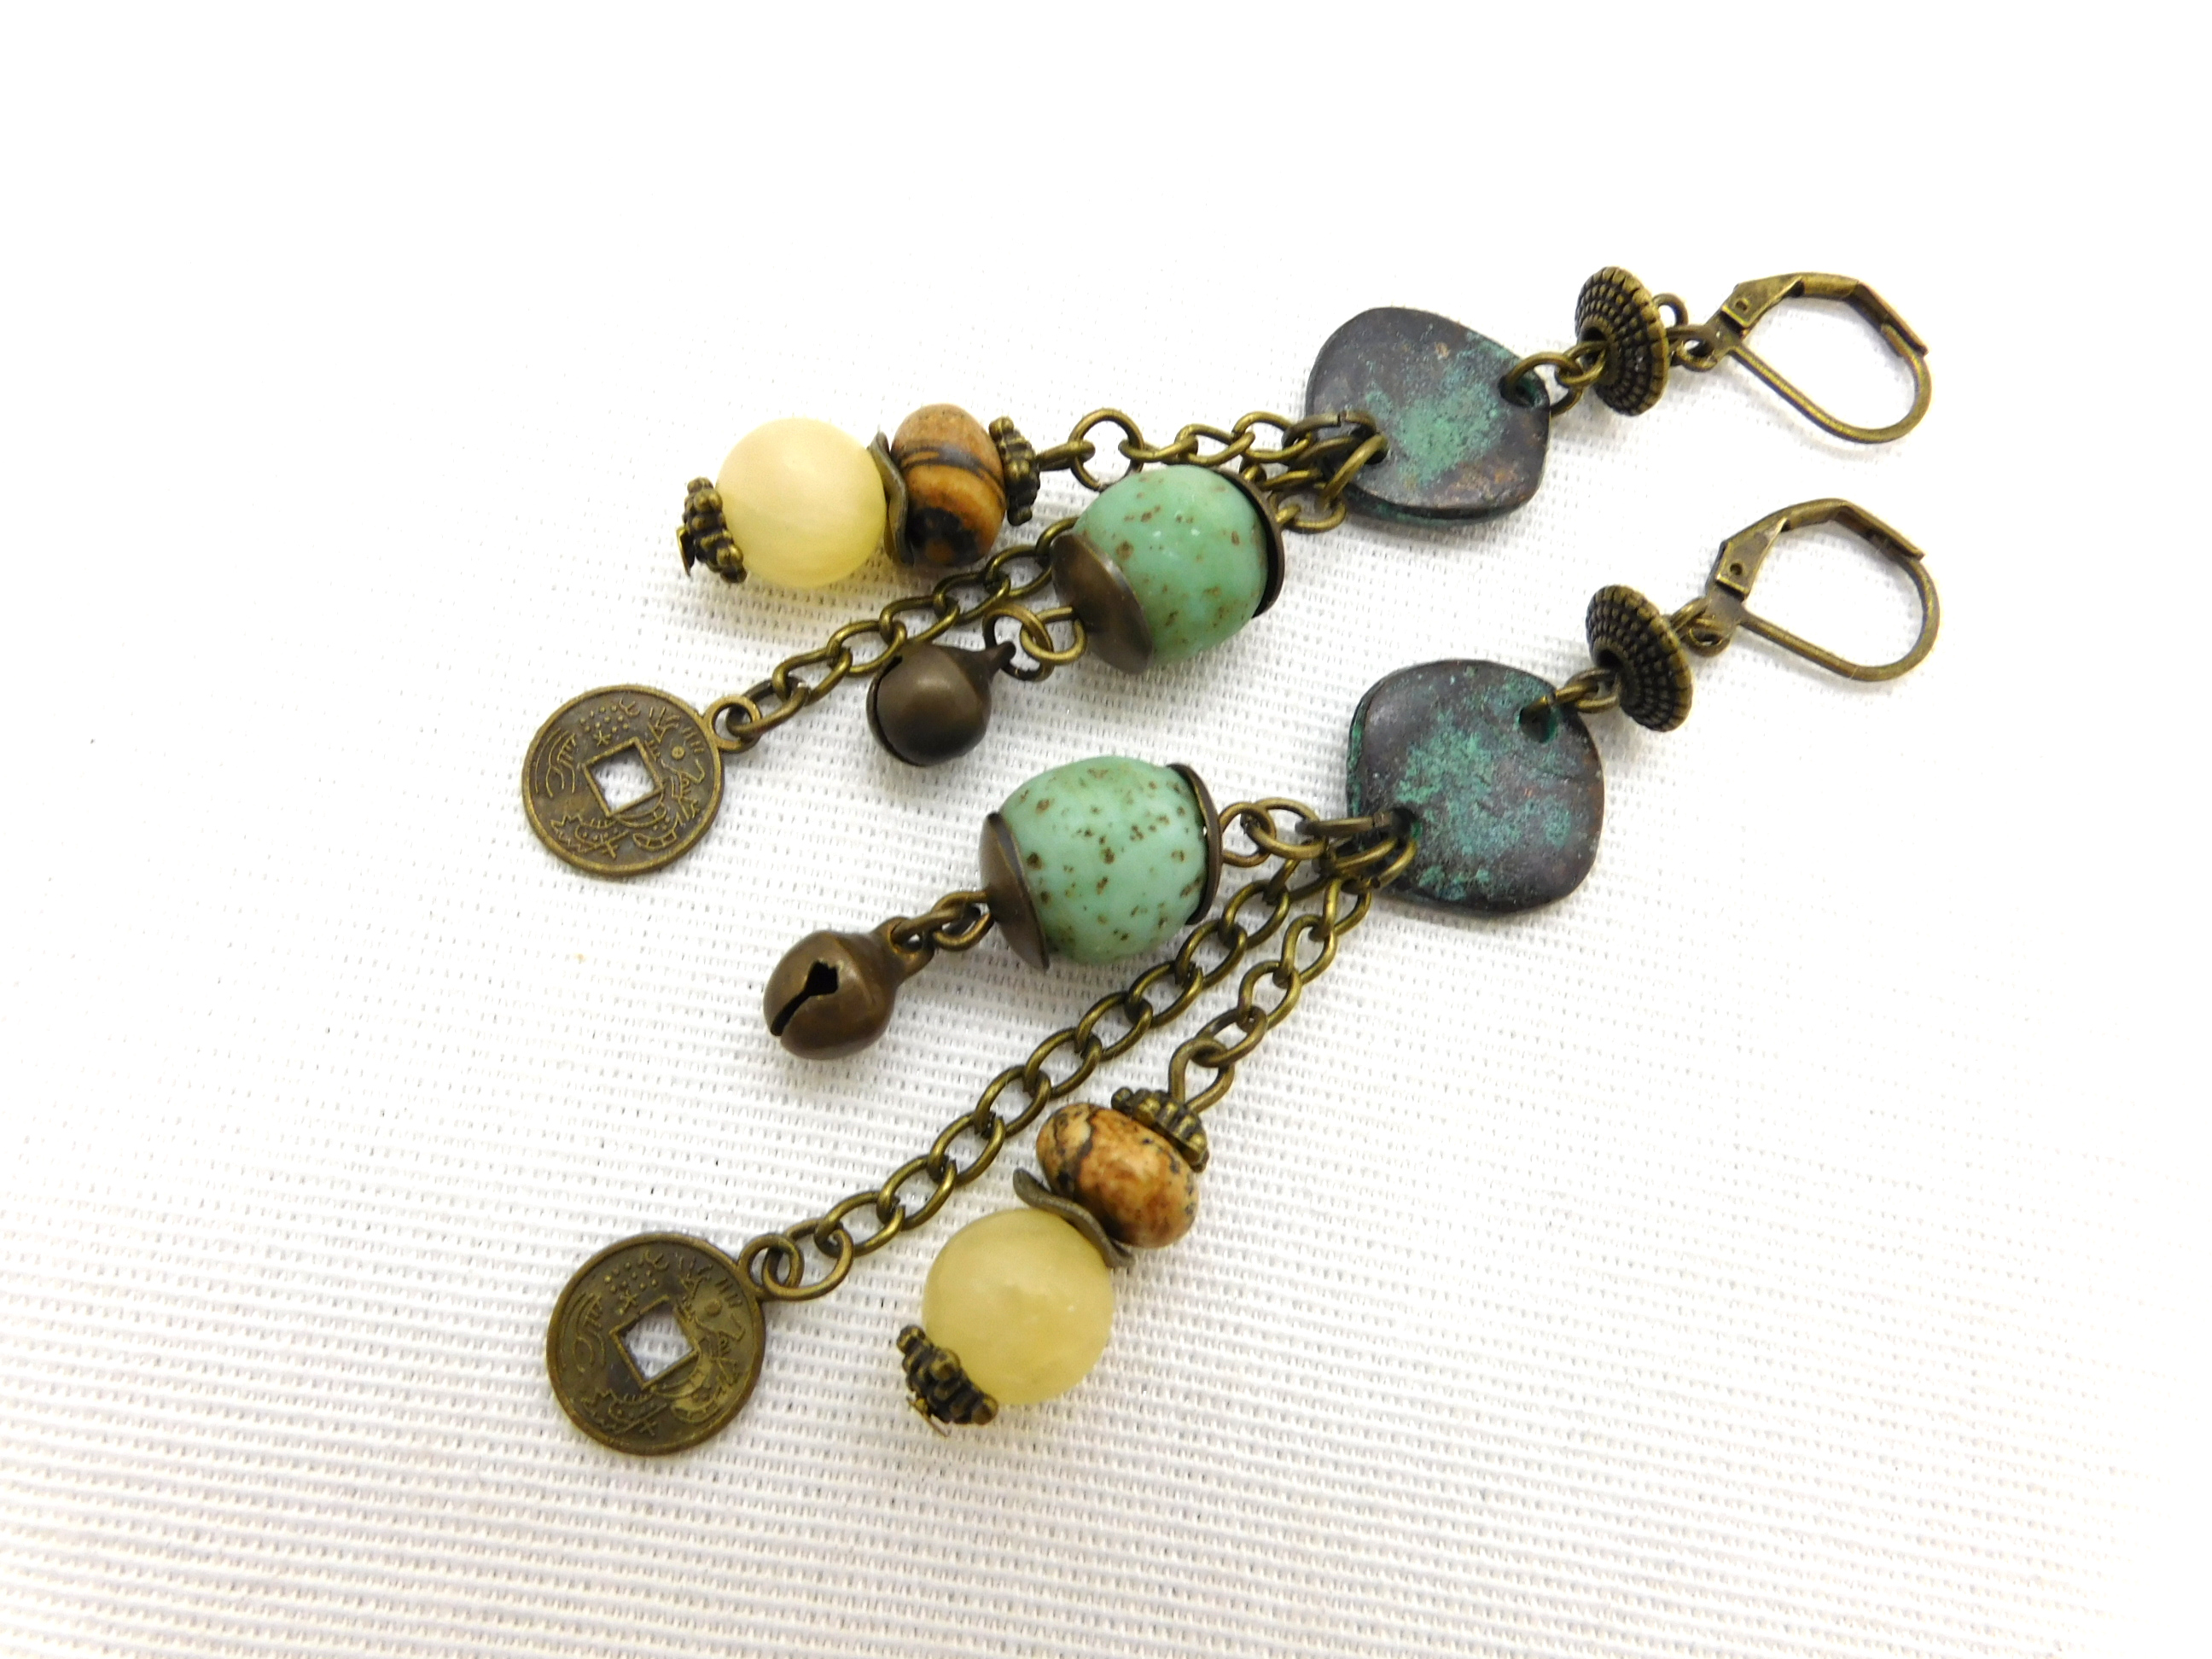 rustic earrings with an antique look and patina